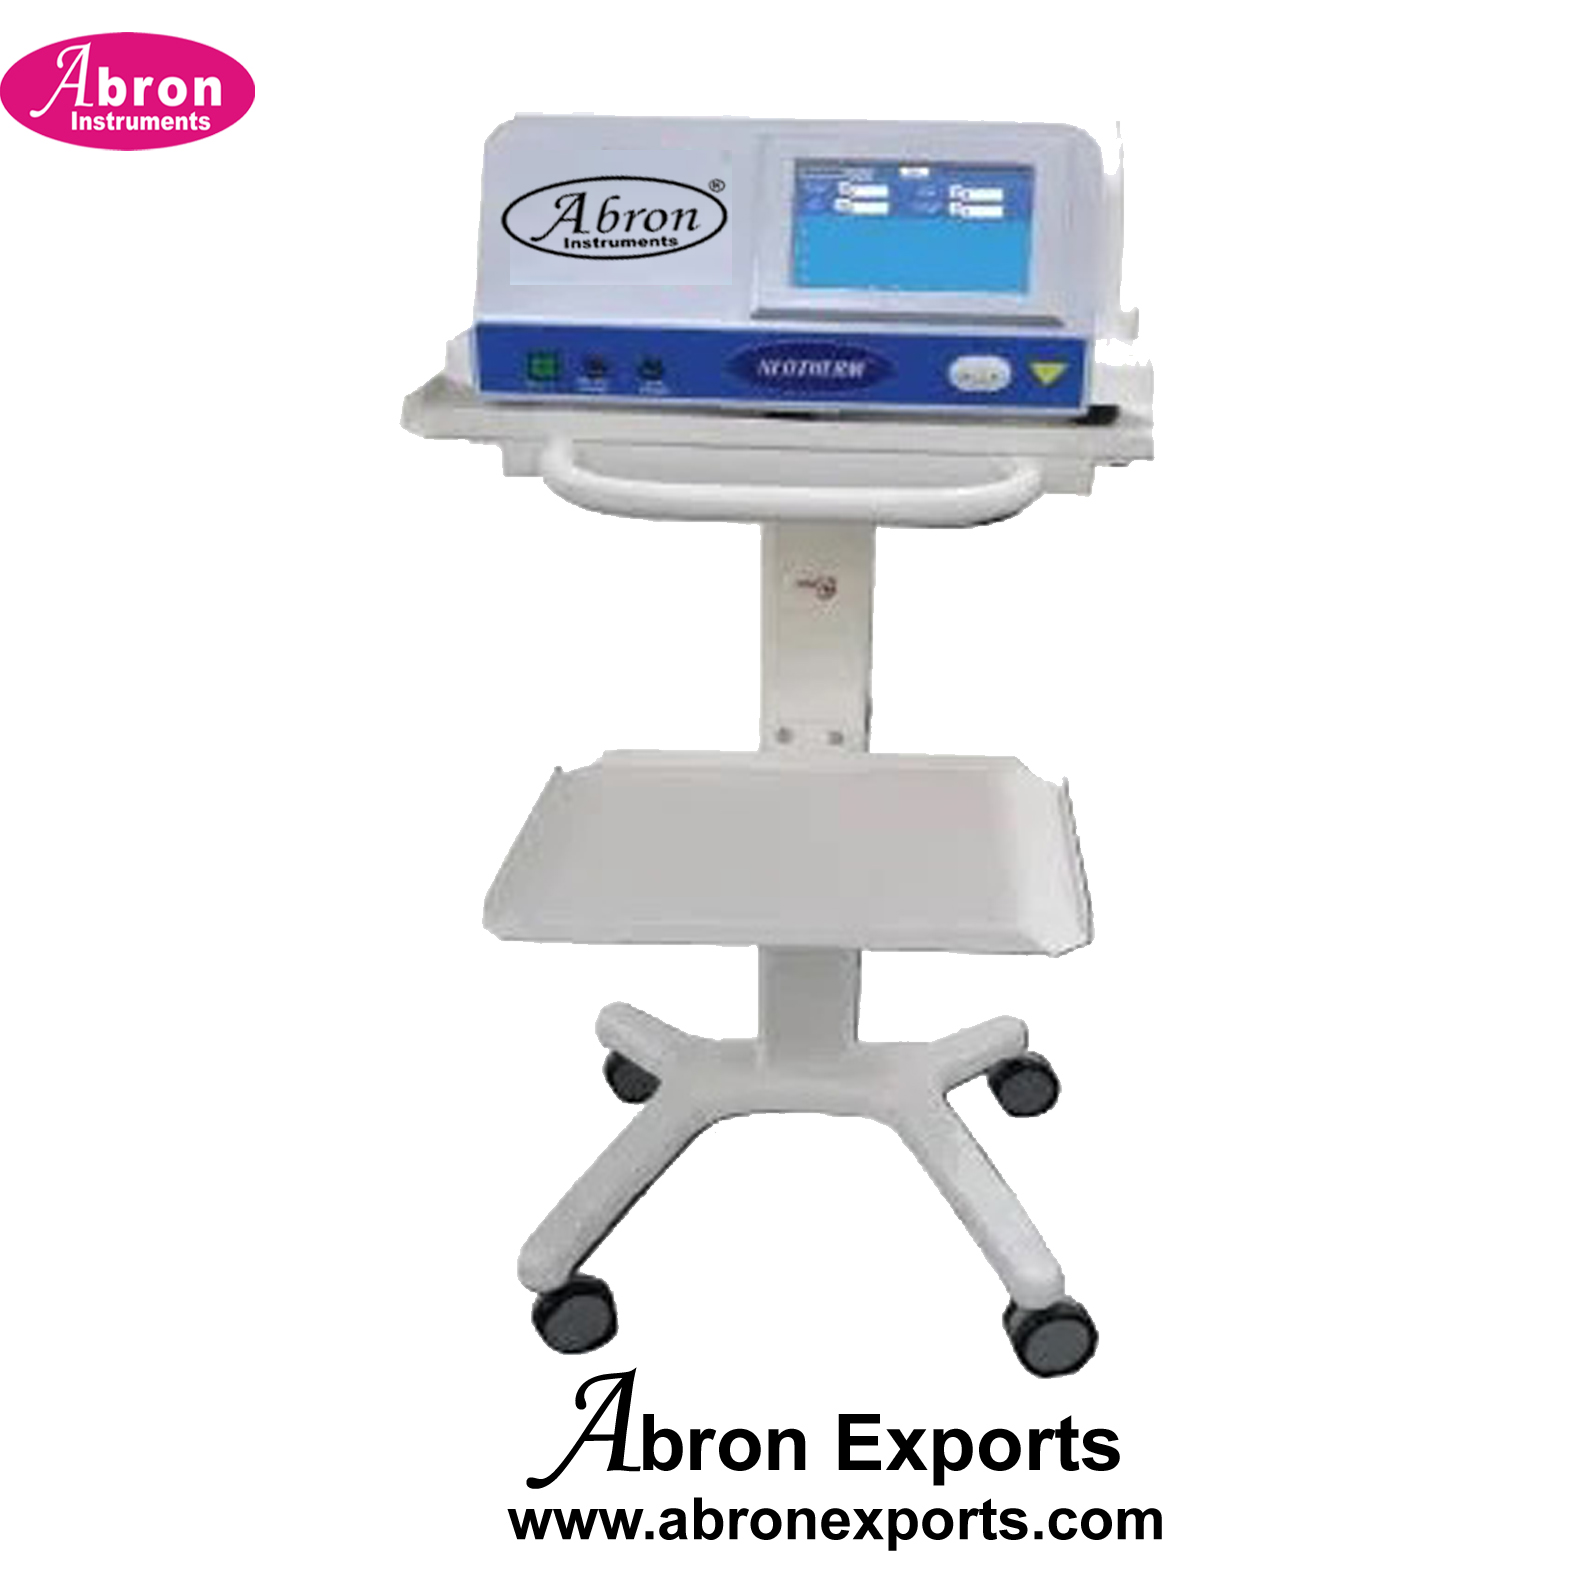 NICU Brain Cooling Uint Neothermal Neonetal Full body Cooling systems Hospital Nursing Home Abron ABM-1118ST 